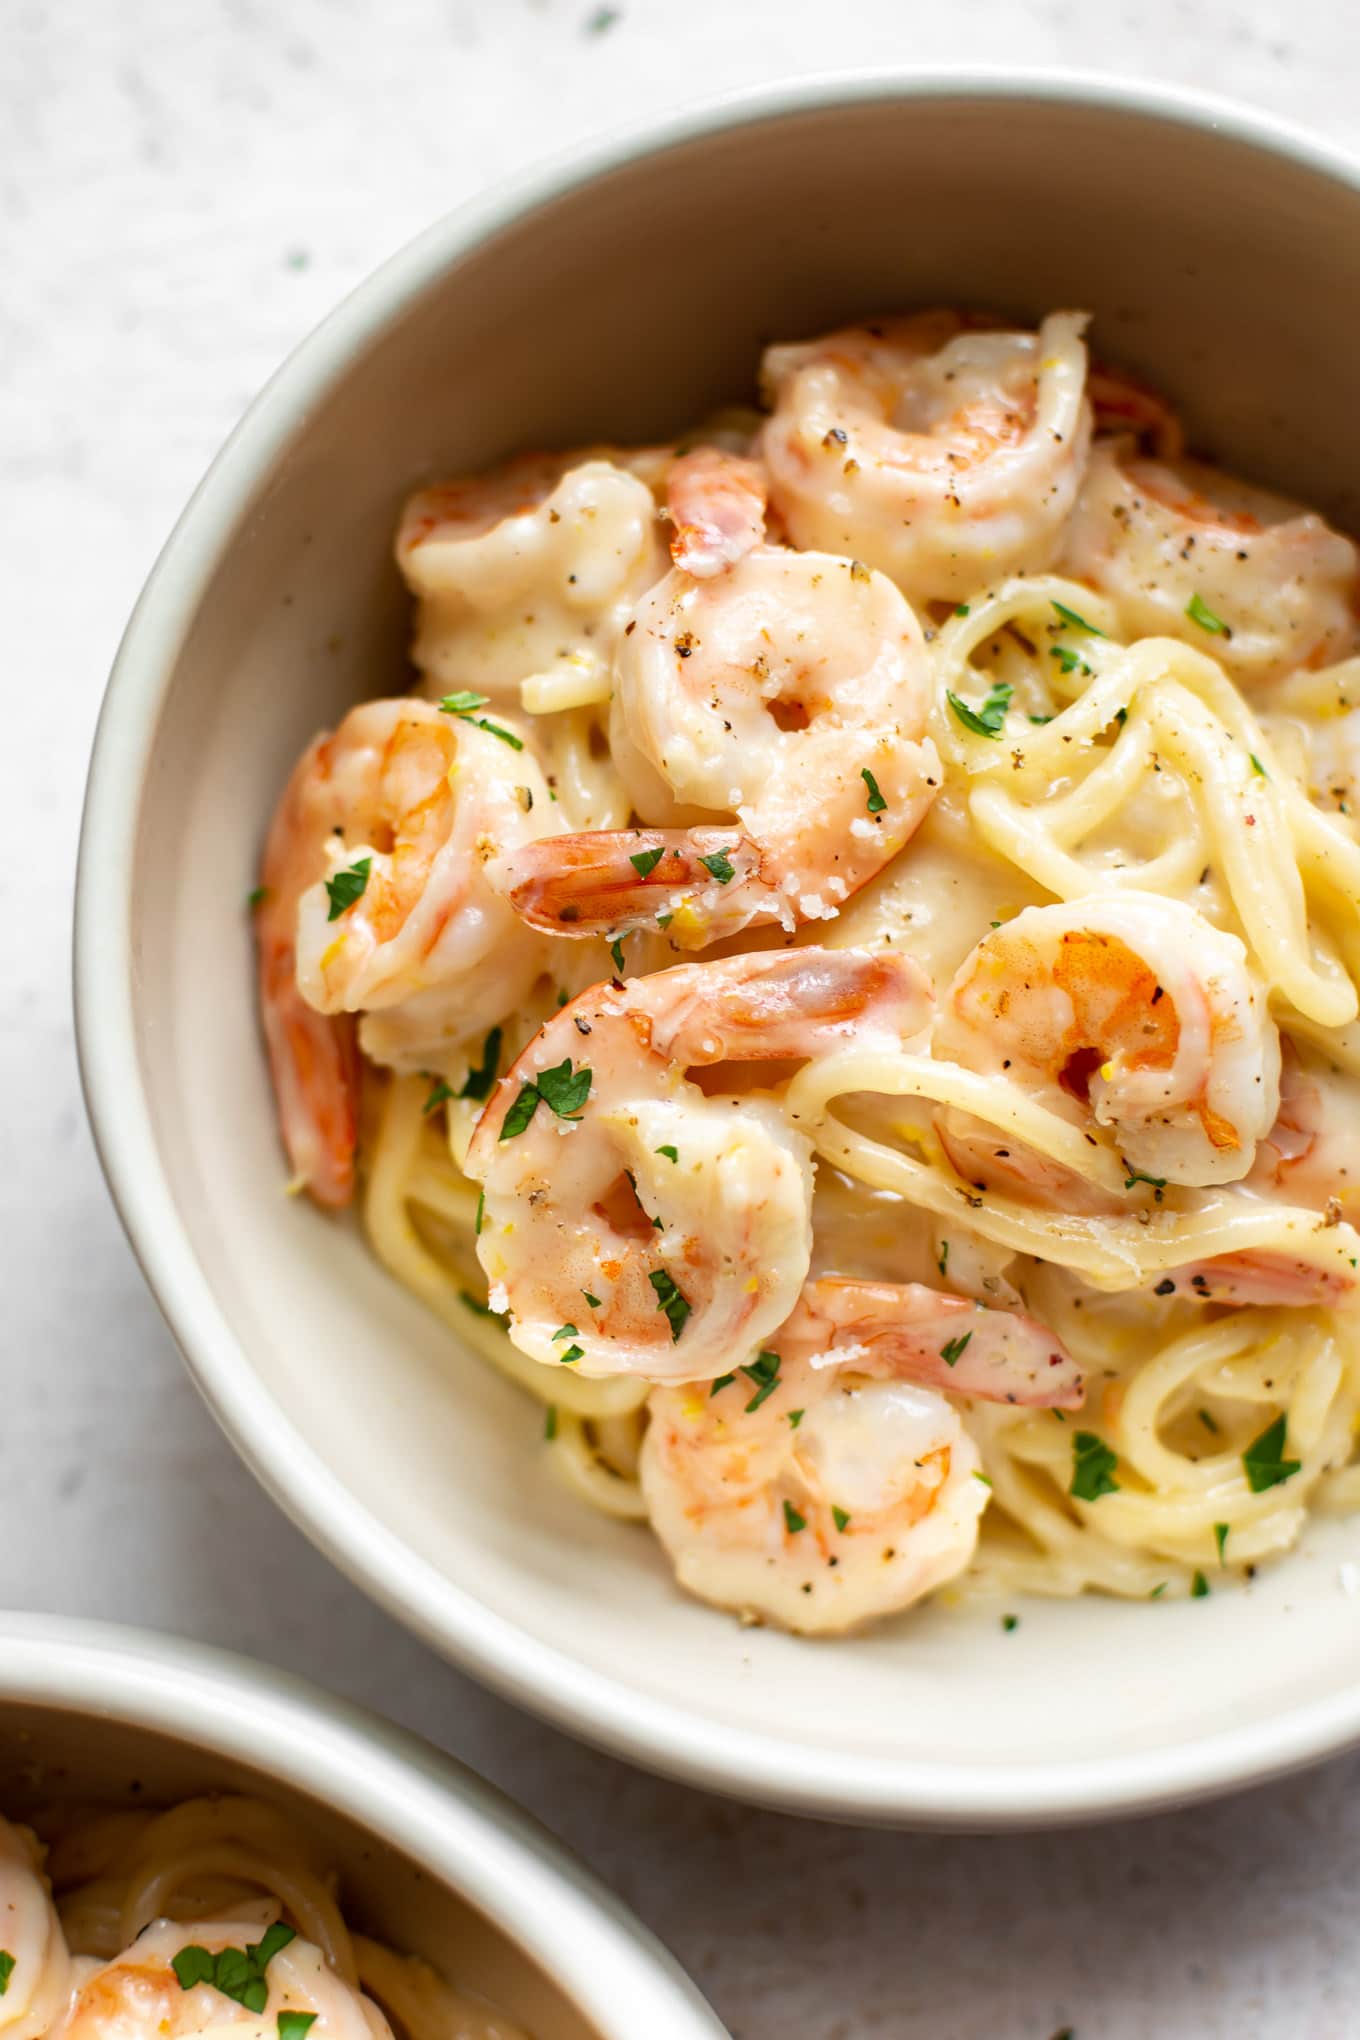 Shrimp,Garlic,Wine,Cream Sauce For Pasta / Penne With Shrimp And Herbed ...